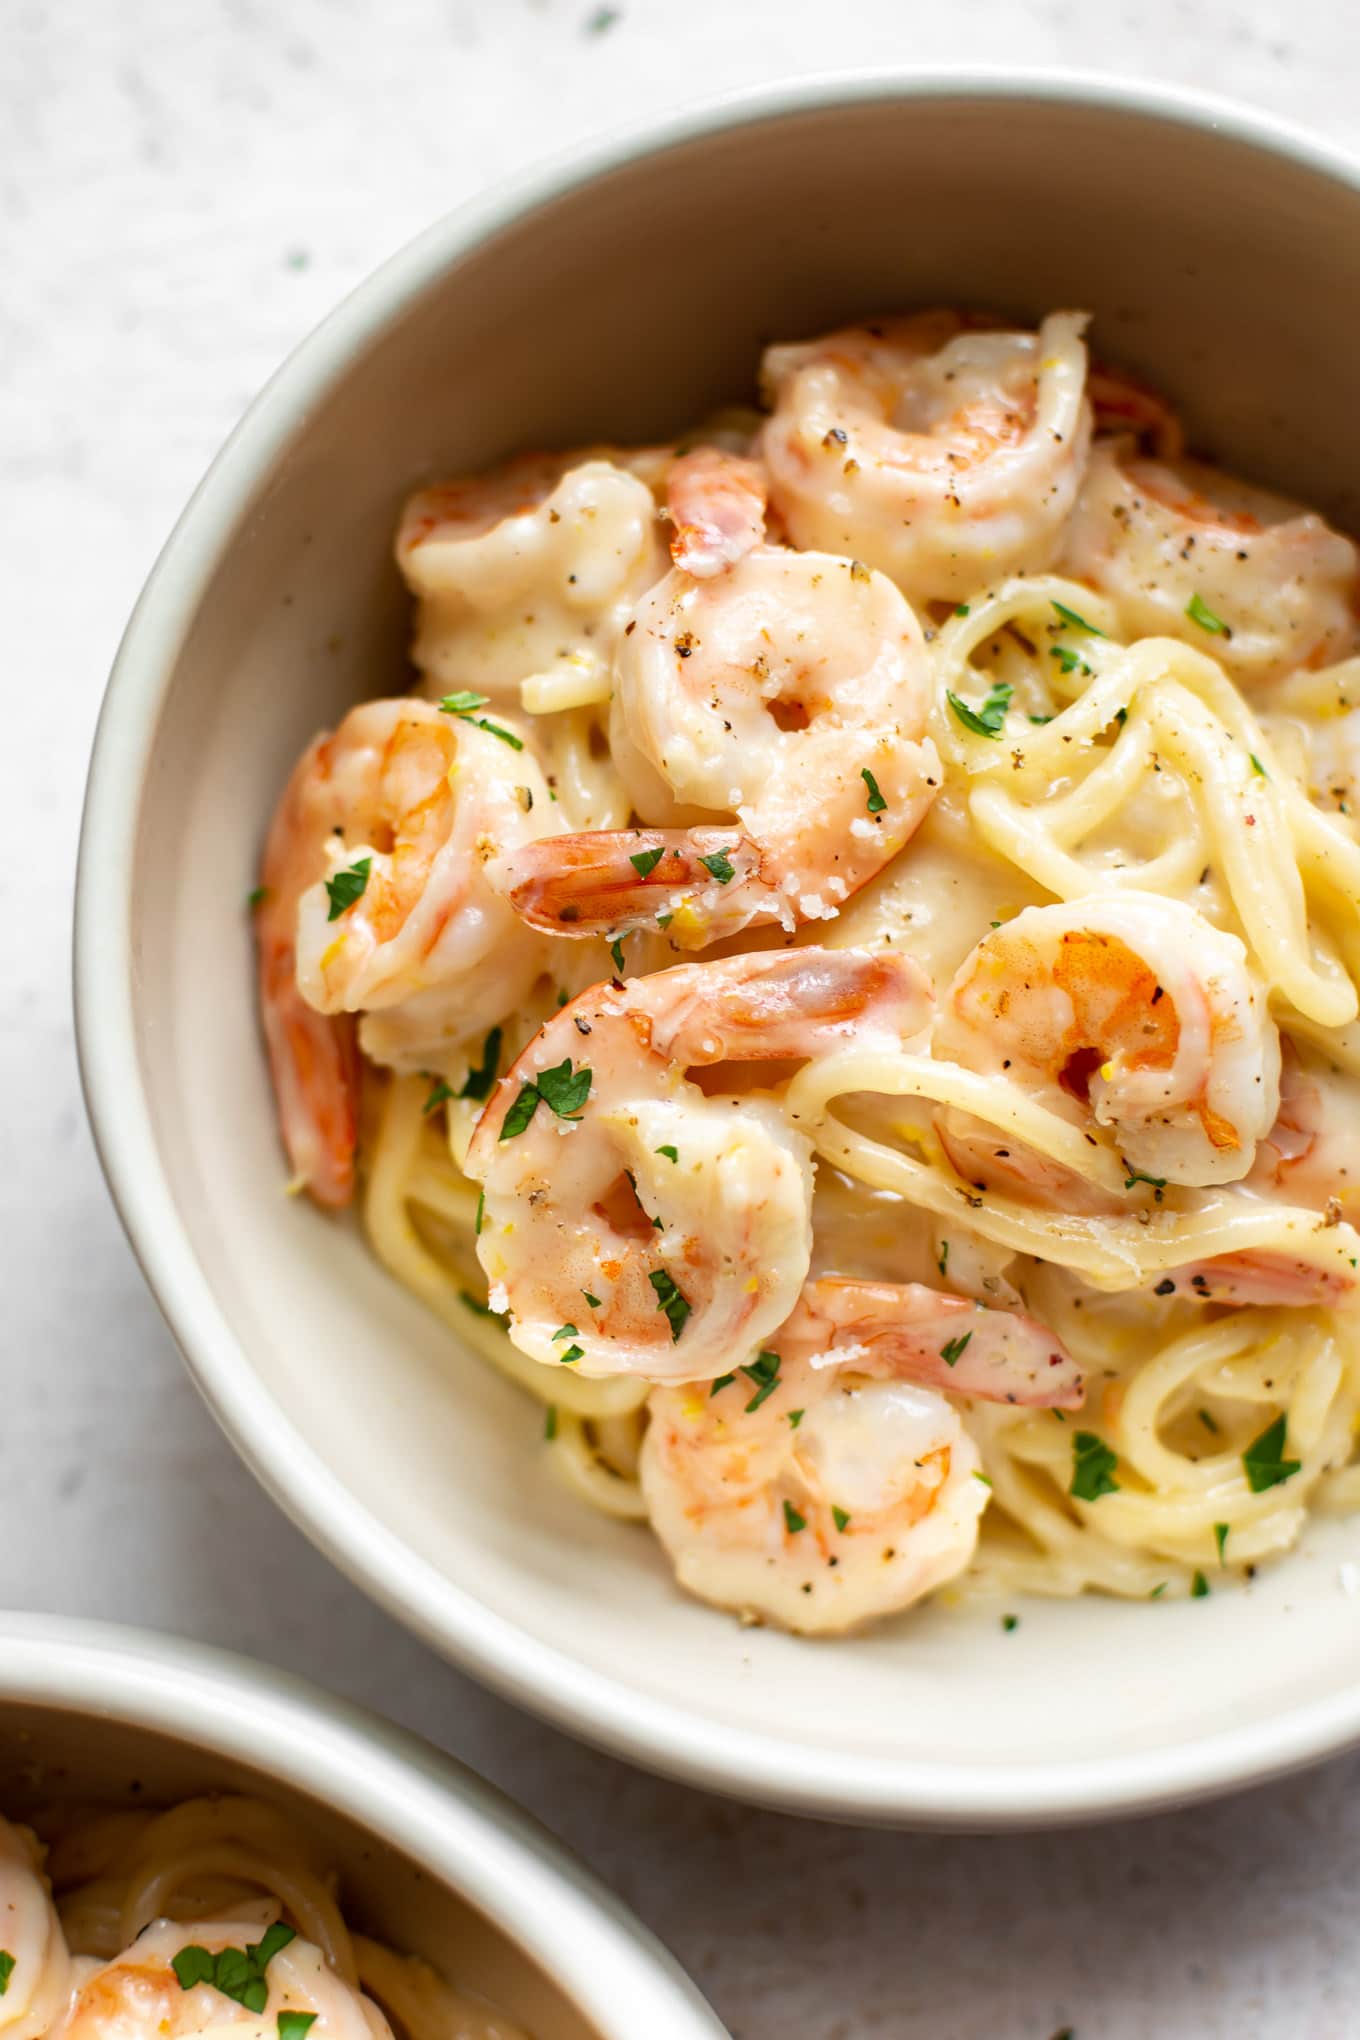 Shrimp,Garlic,Wine,Cream Sauce For Pasta / Penne With Shrimp And Herbed ...